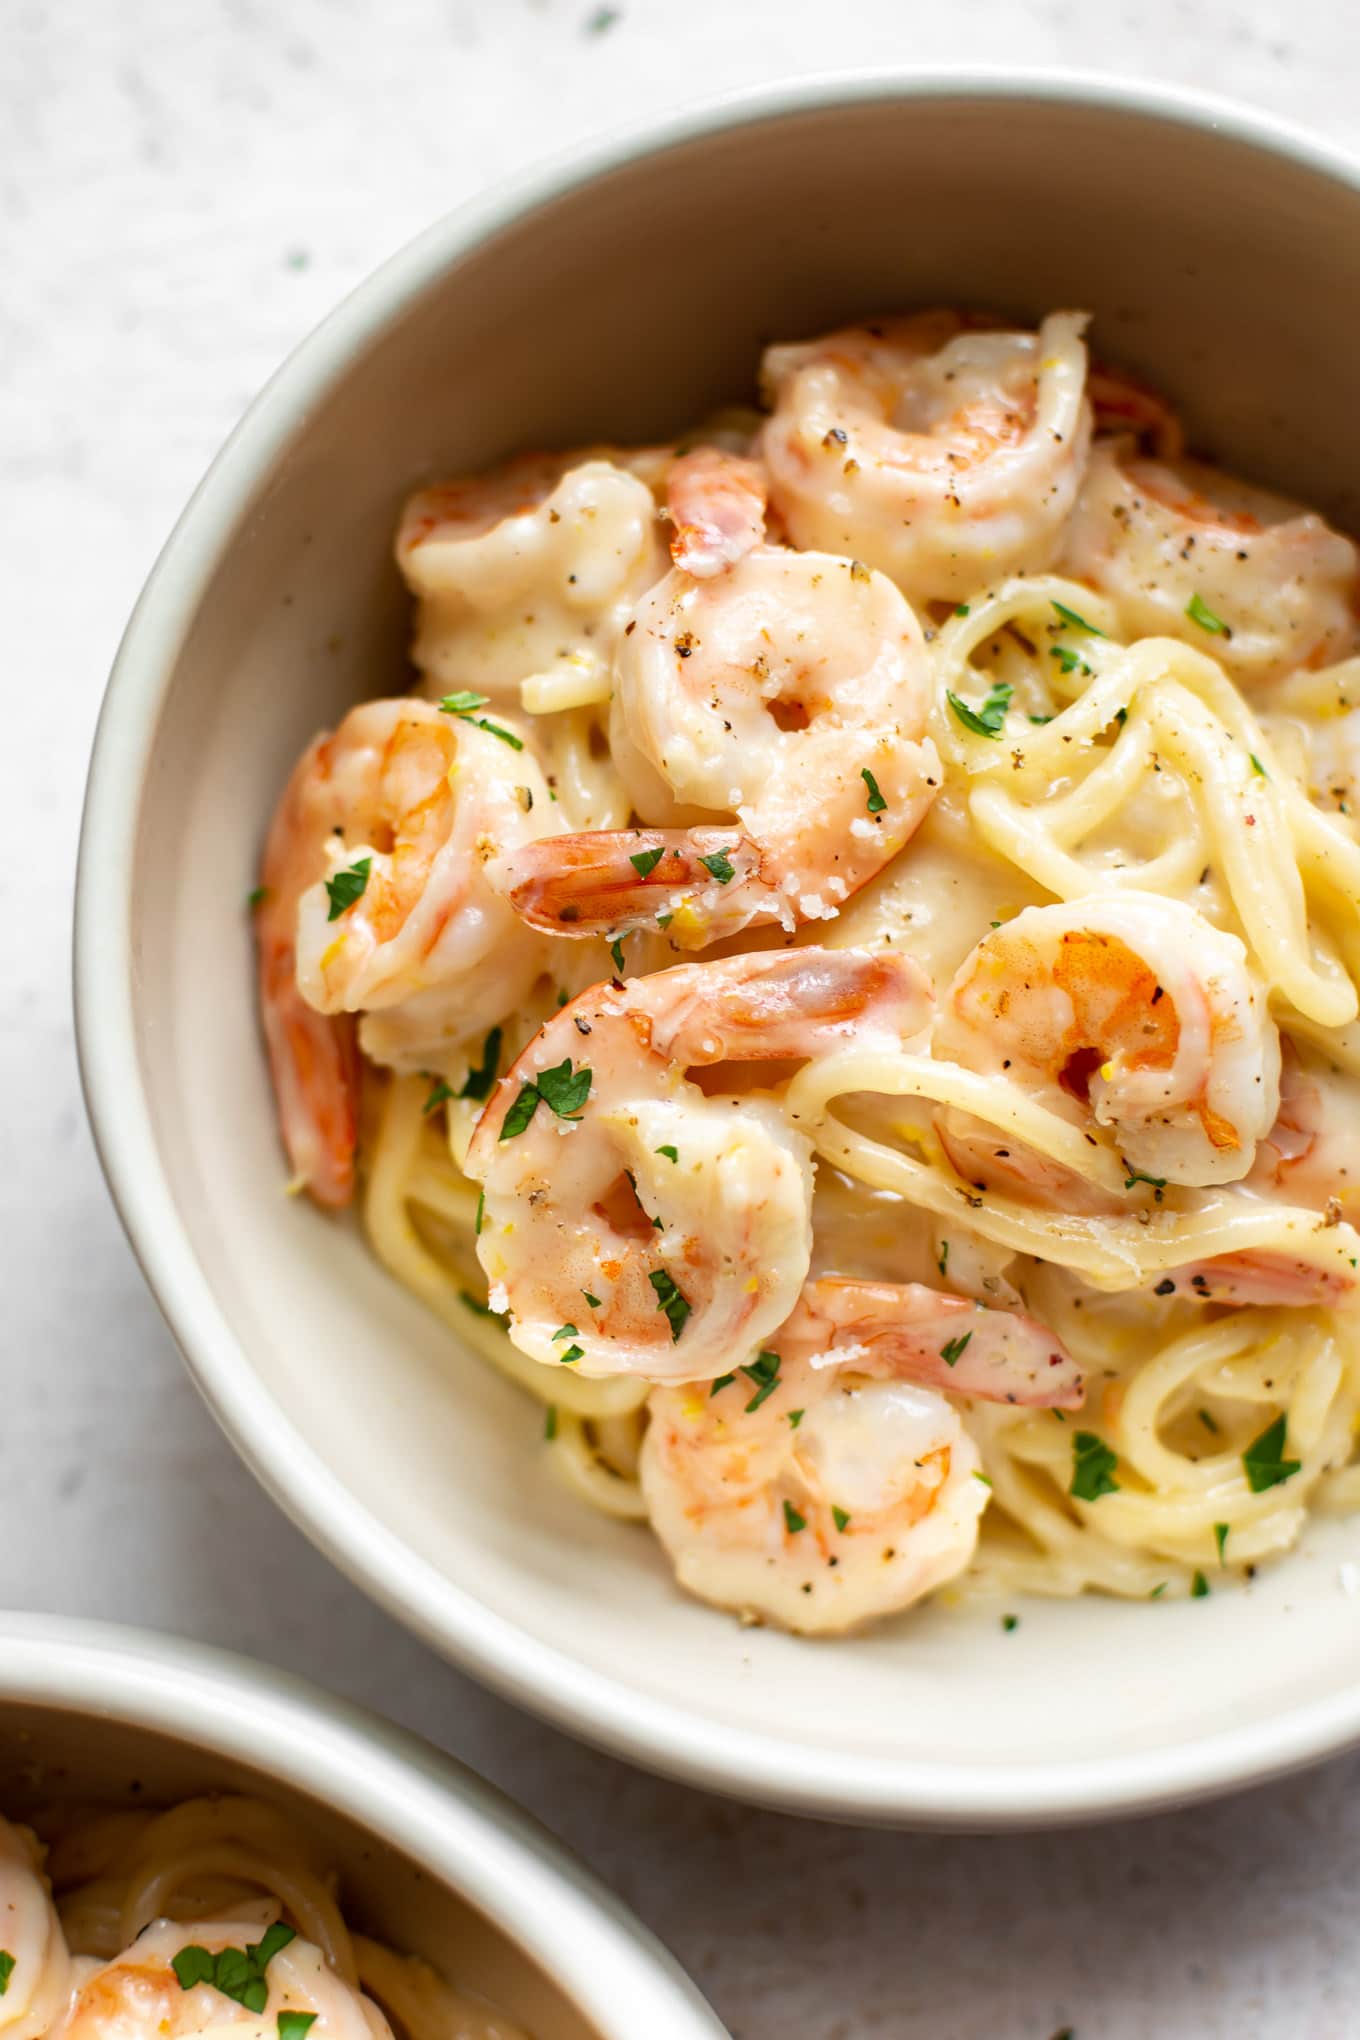 Shrimp,Garlic,Wine,Cream Sauce For Pasta / Penne With Shrimp And Herbed ...